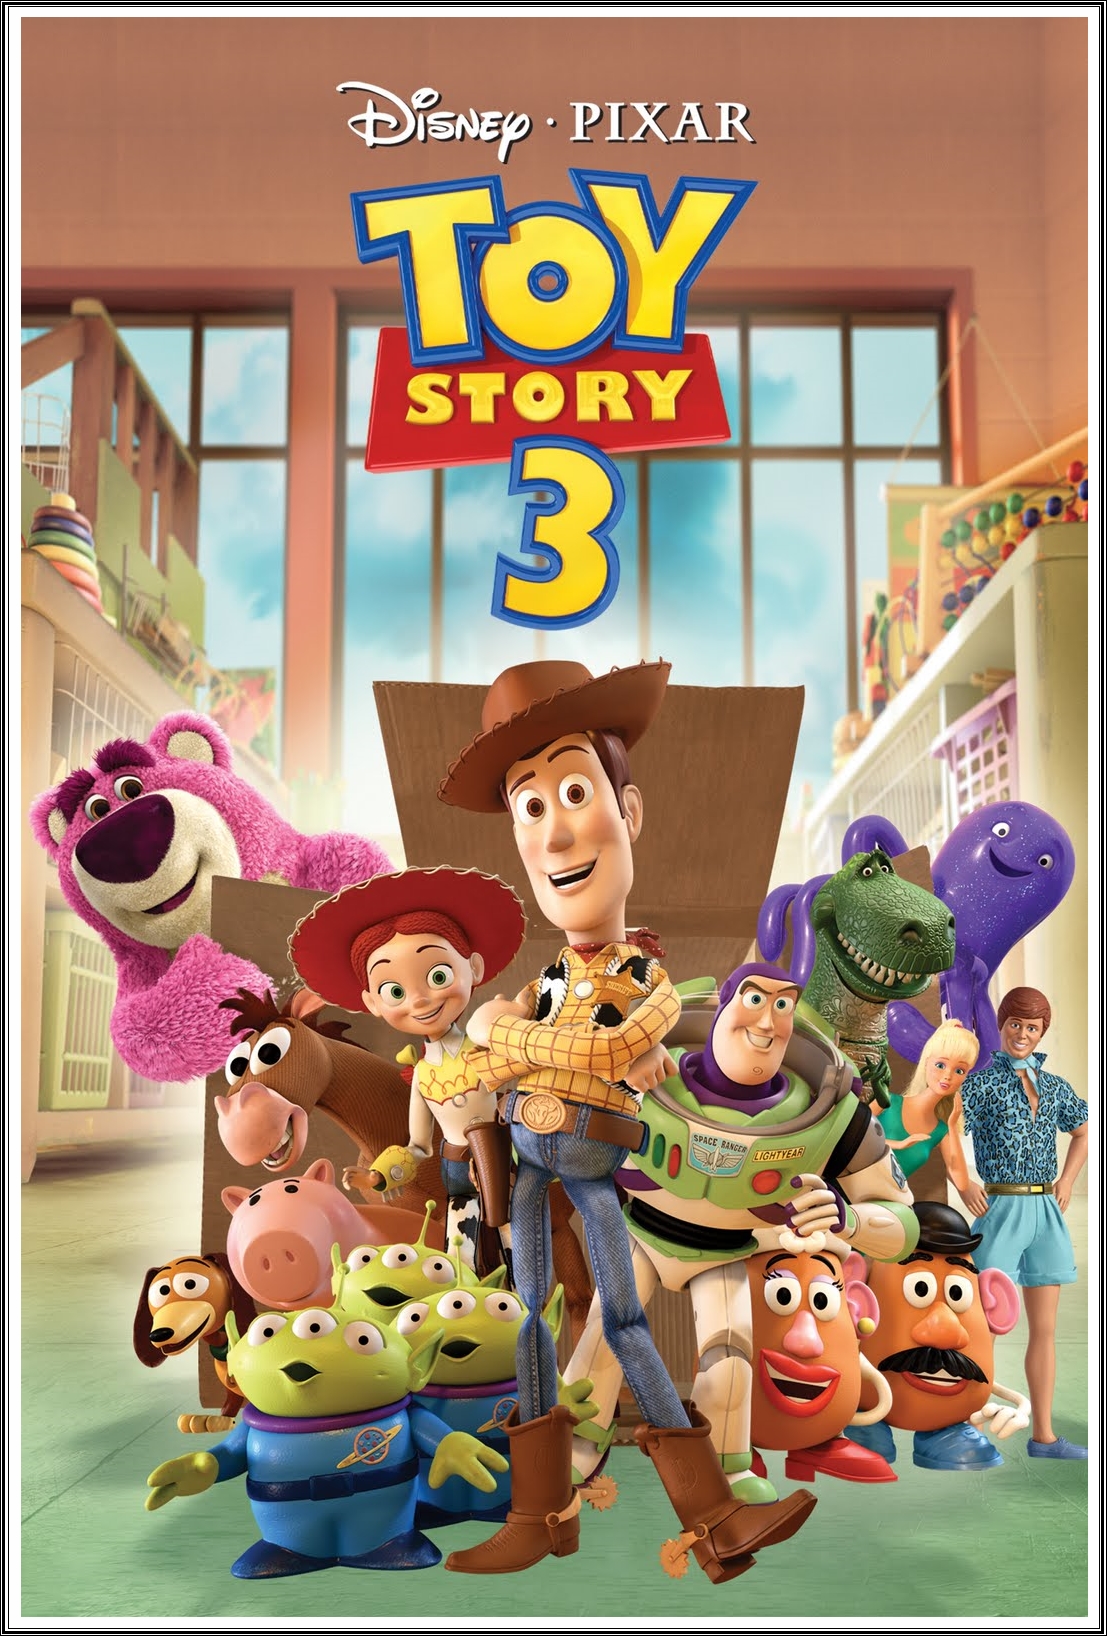 Toy story 3 review essay peer